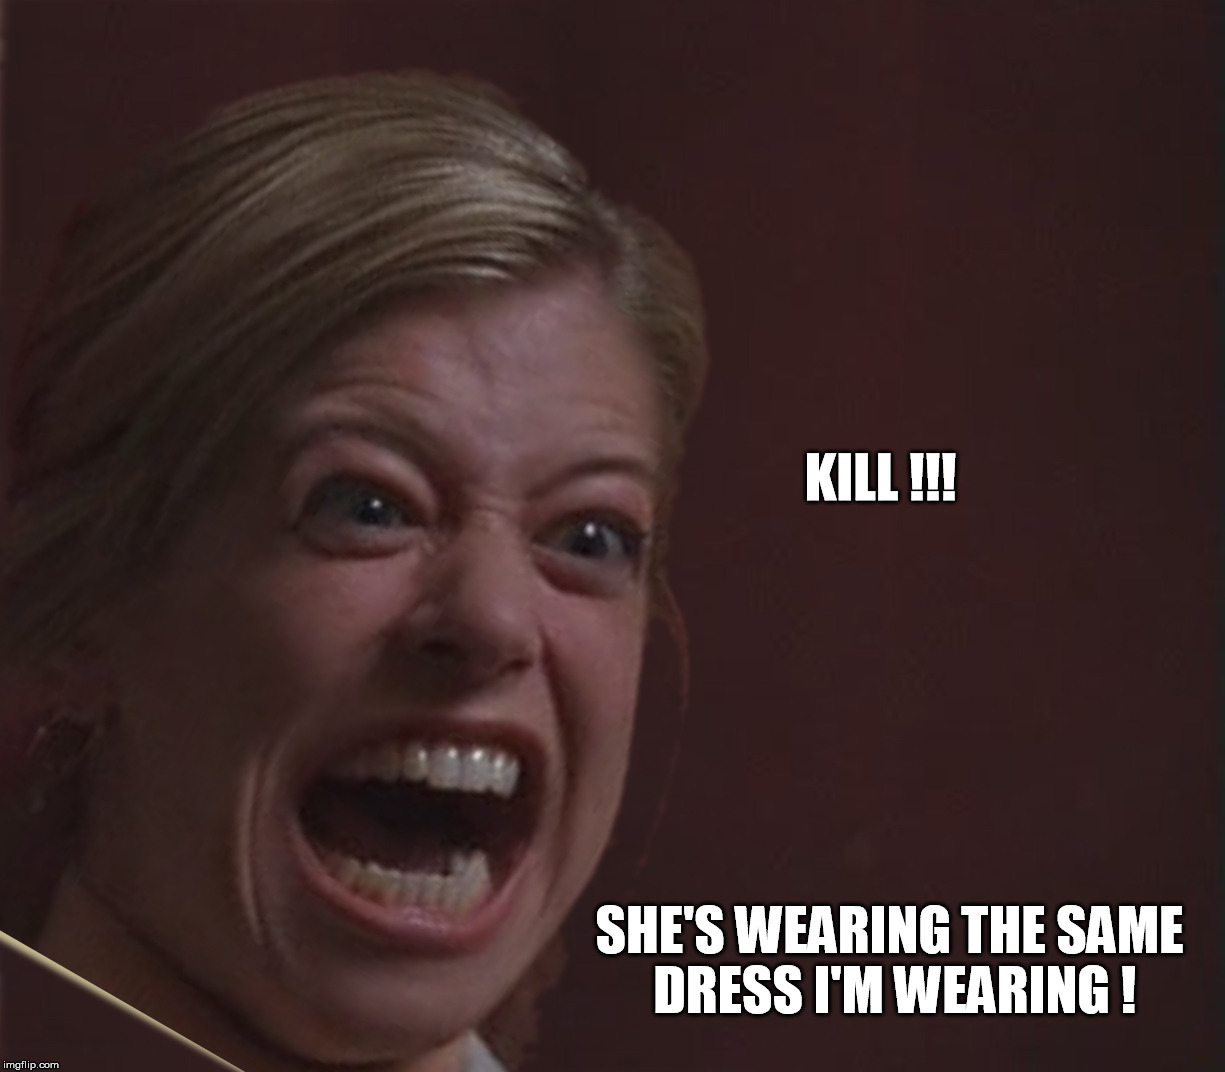 That Night at the Awards | KILL !!! SHE'S WEARING THE SAME DRESS I'M WEARING ! | image tagged in same dress horror | made w/ Imgflip meme maker